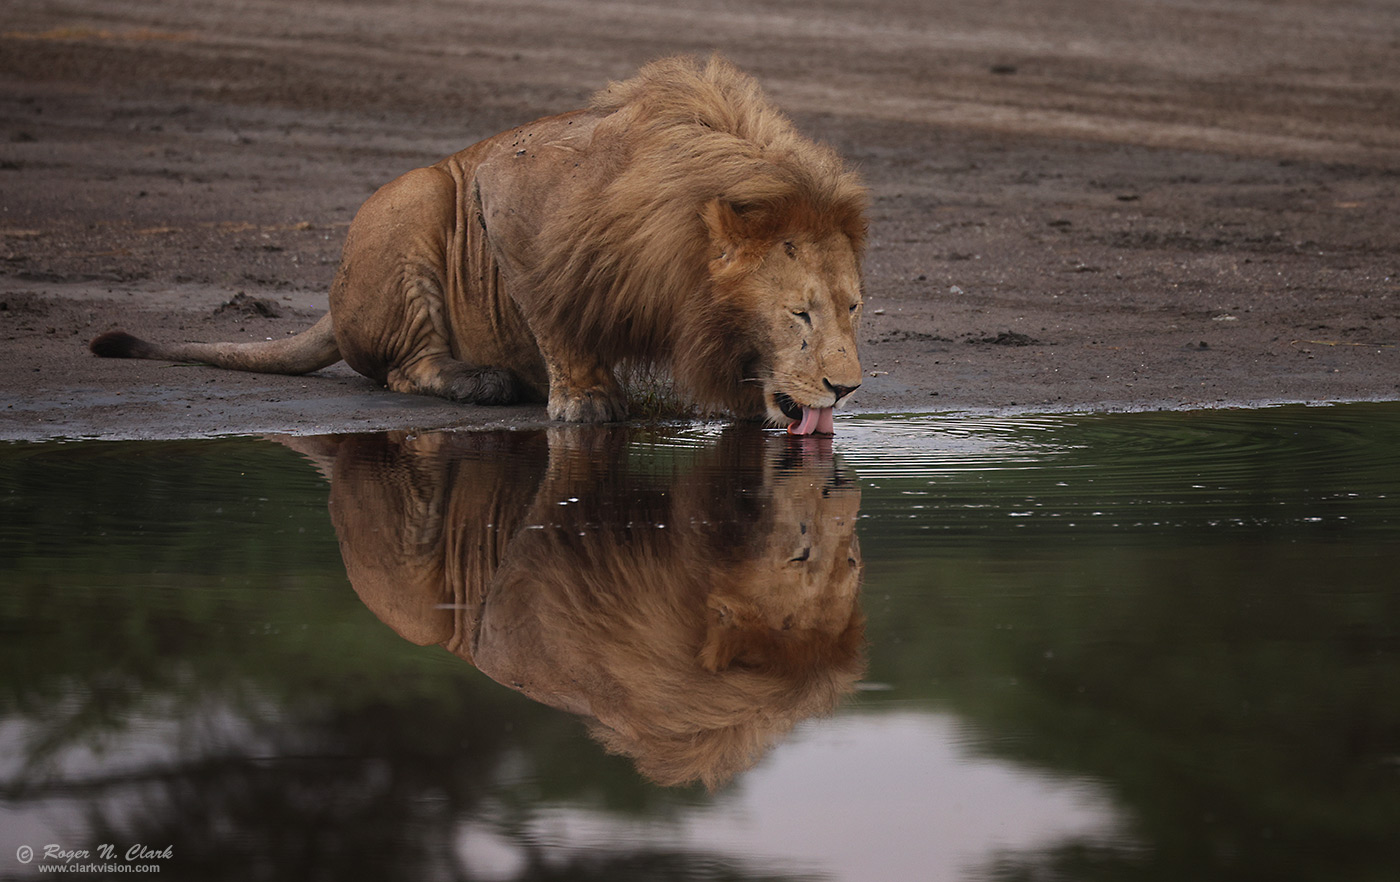 image male-lion-drinking-reflection-c02-19-2024-4C3A1248-c-1400s.jpg is Copyrighted by Roger N. Clark, www.clarkvision.com